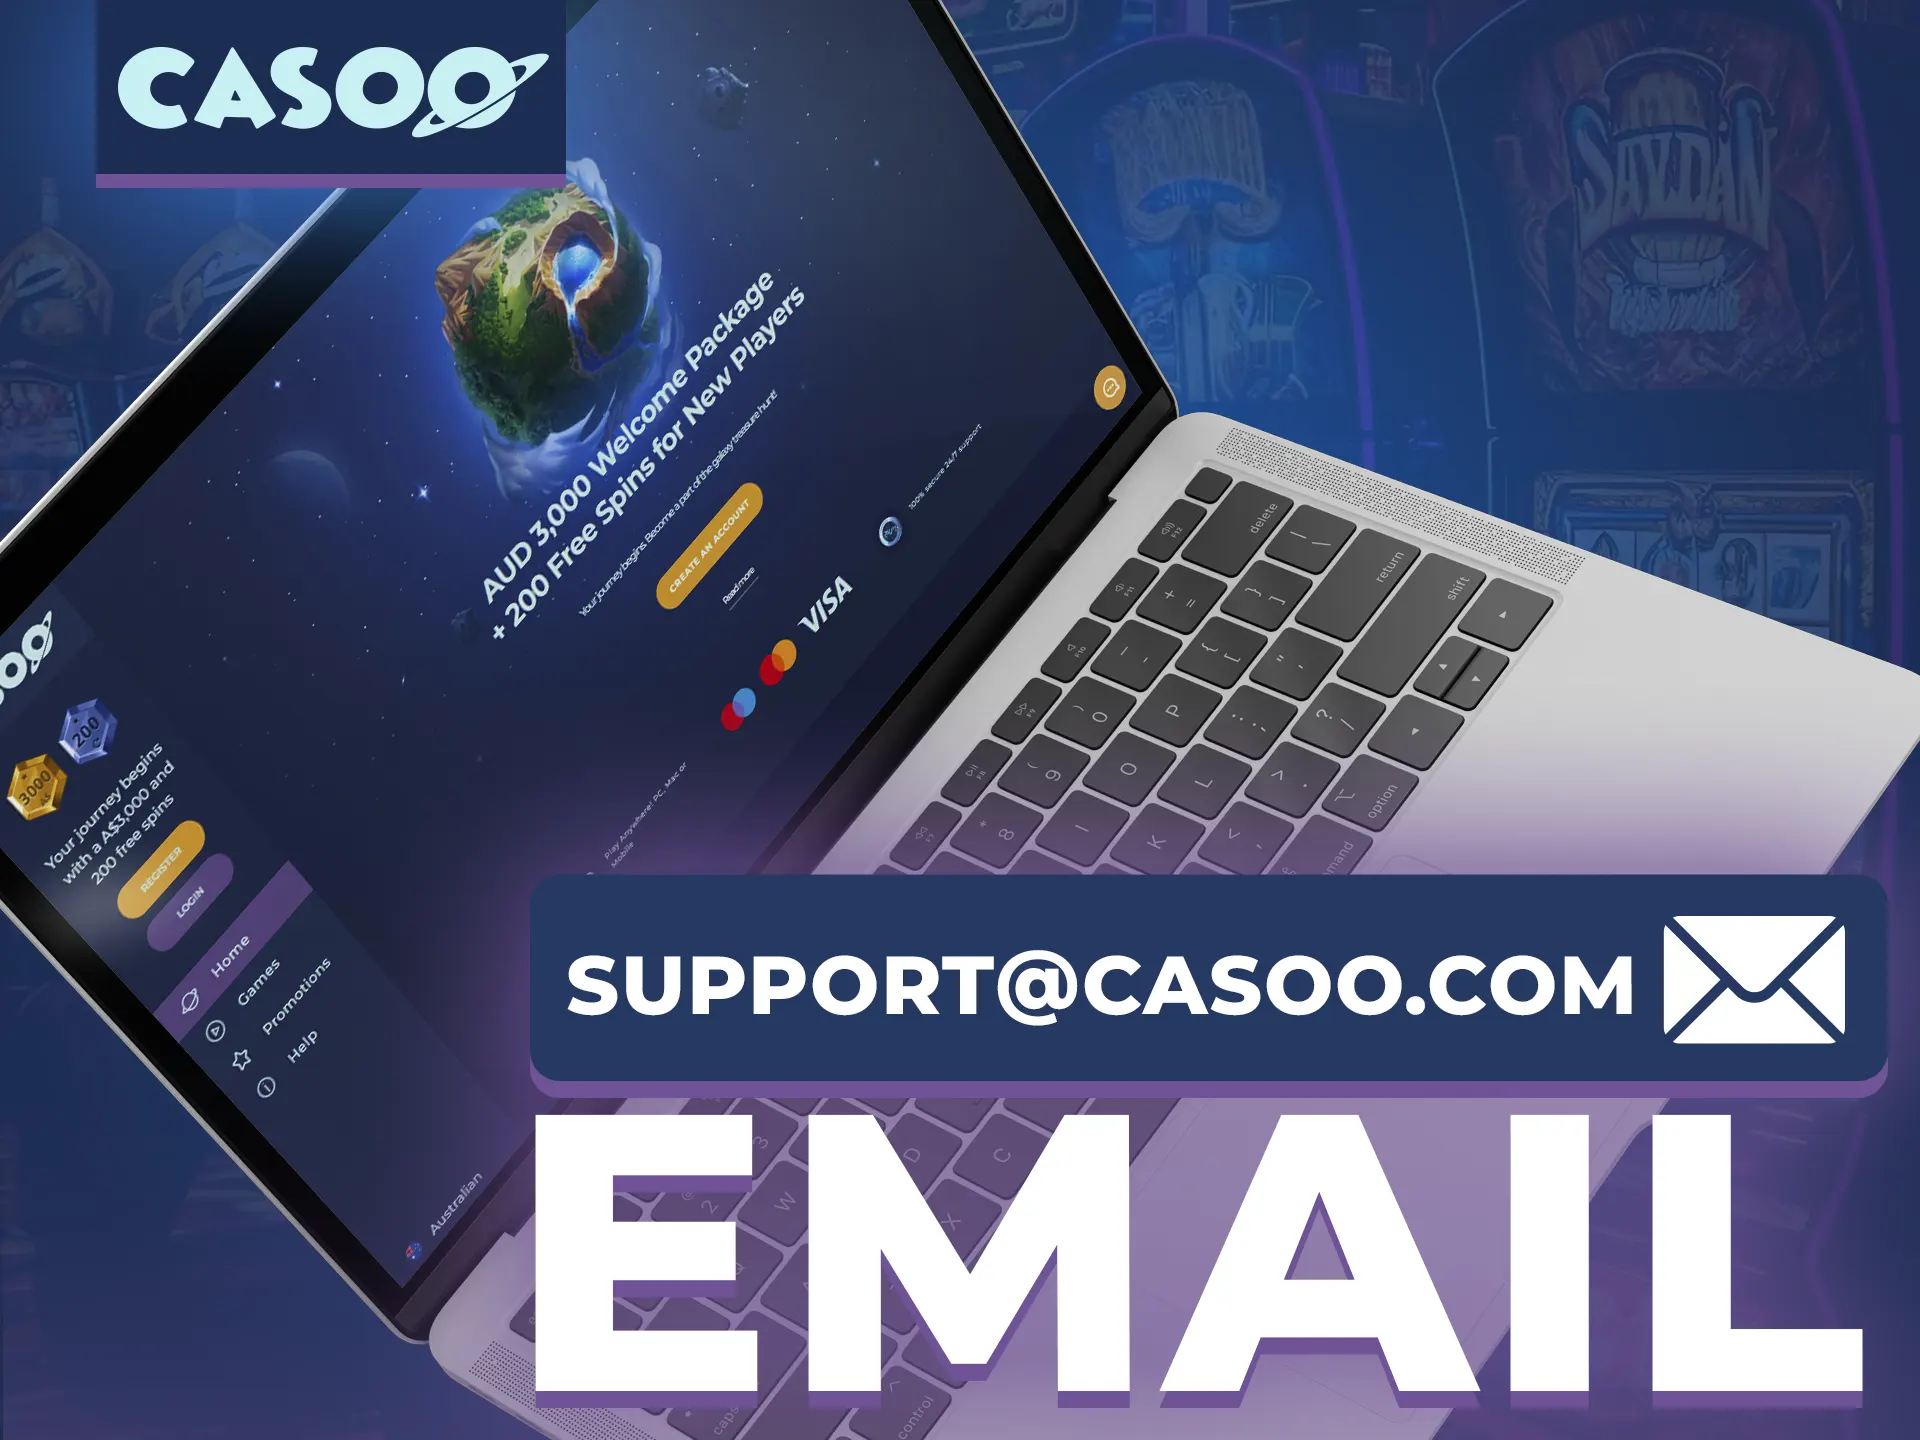 Use email adress to contact with Casoo support.